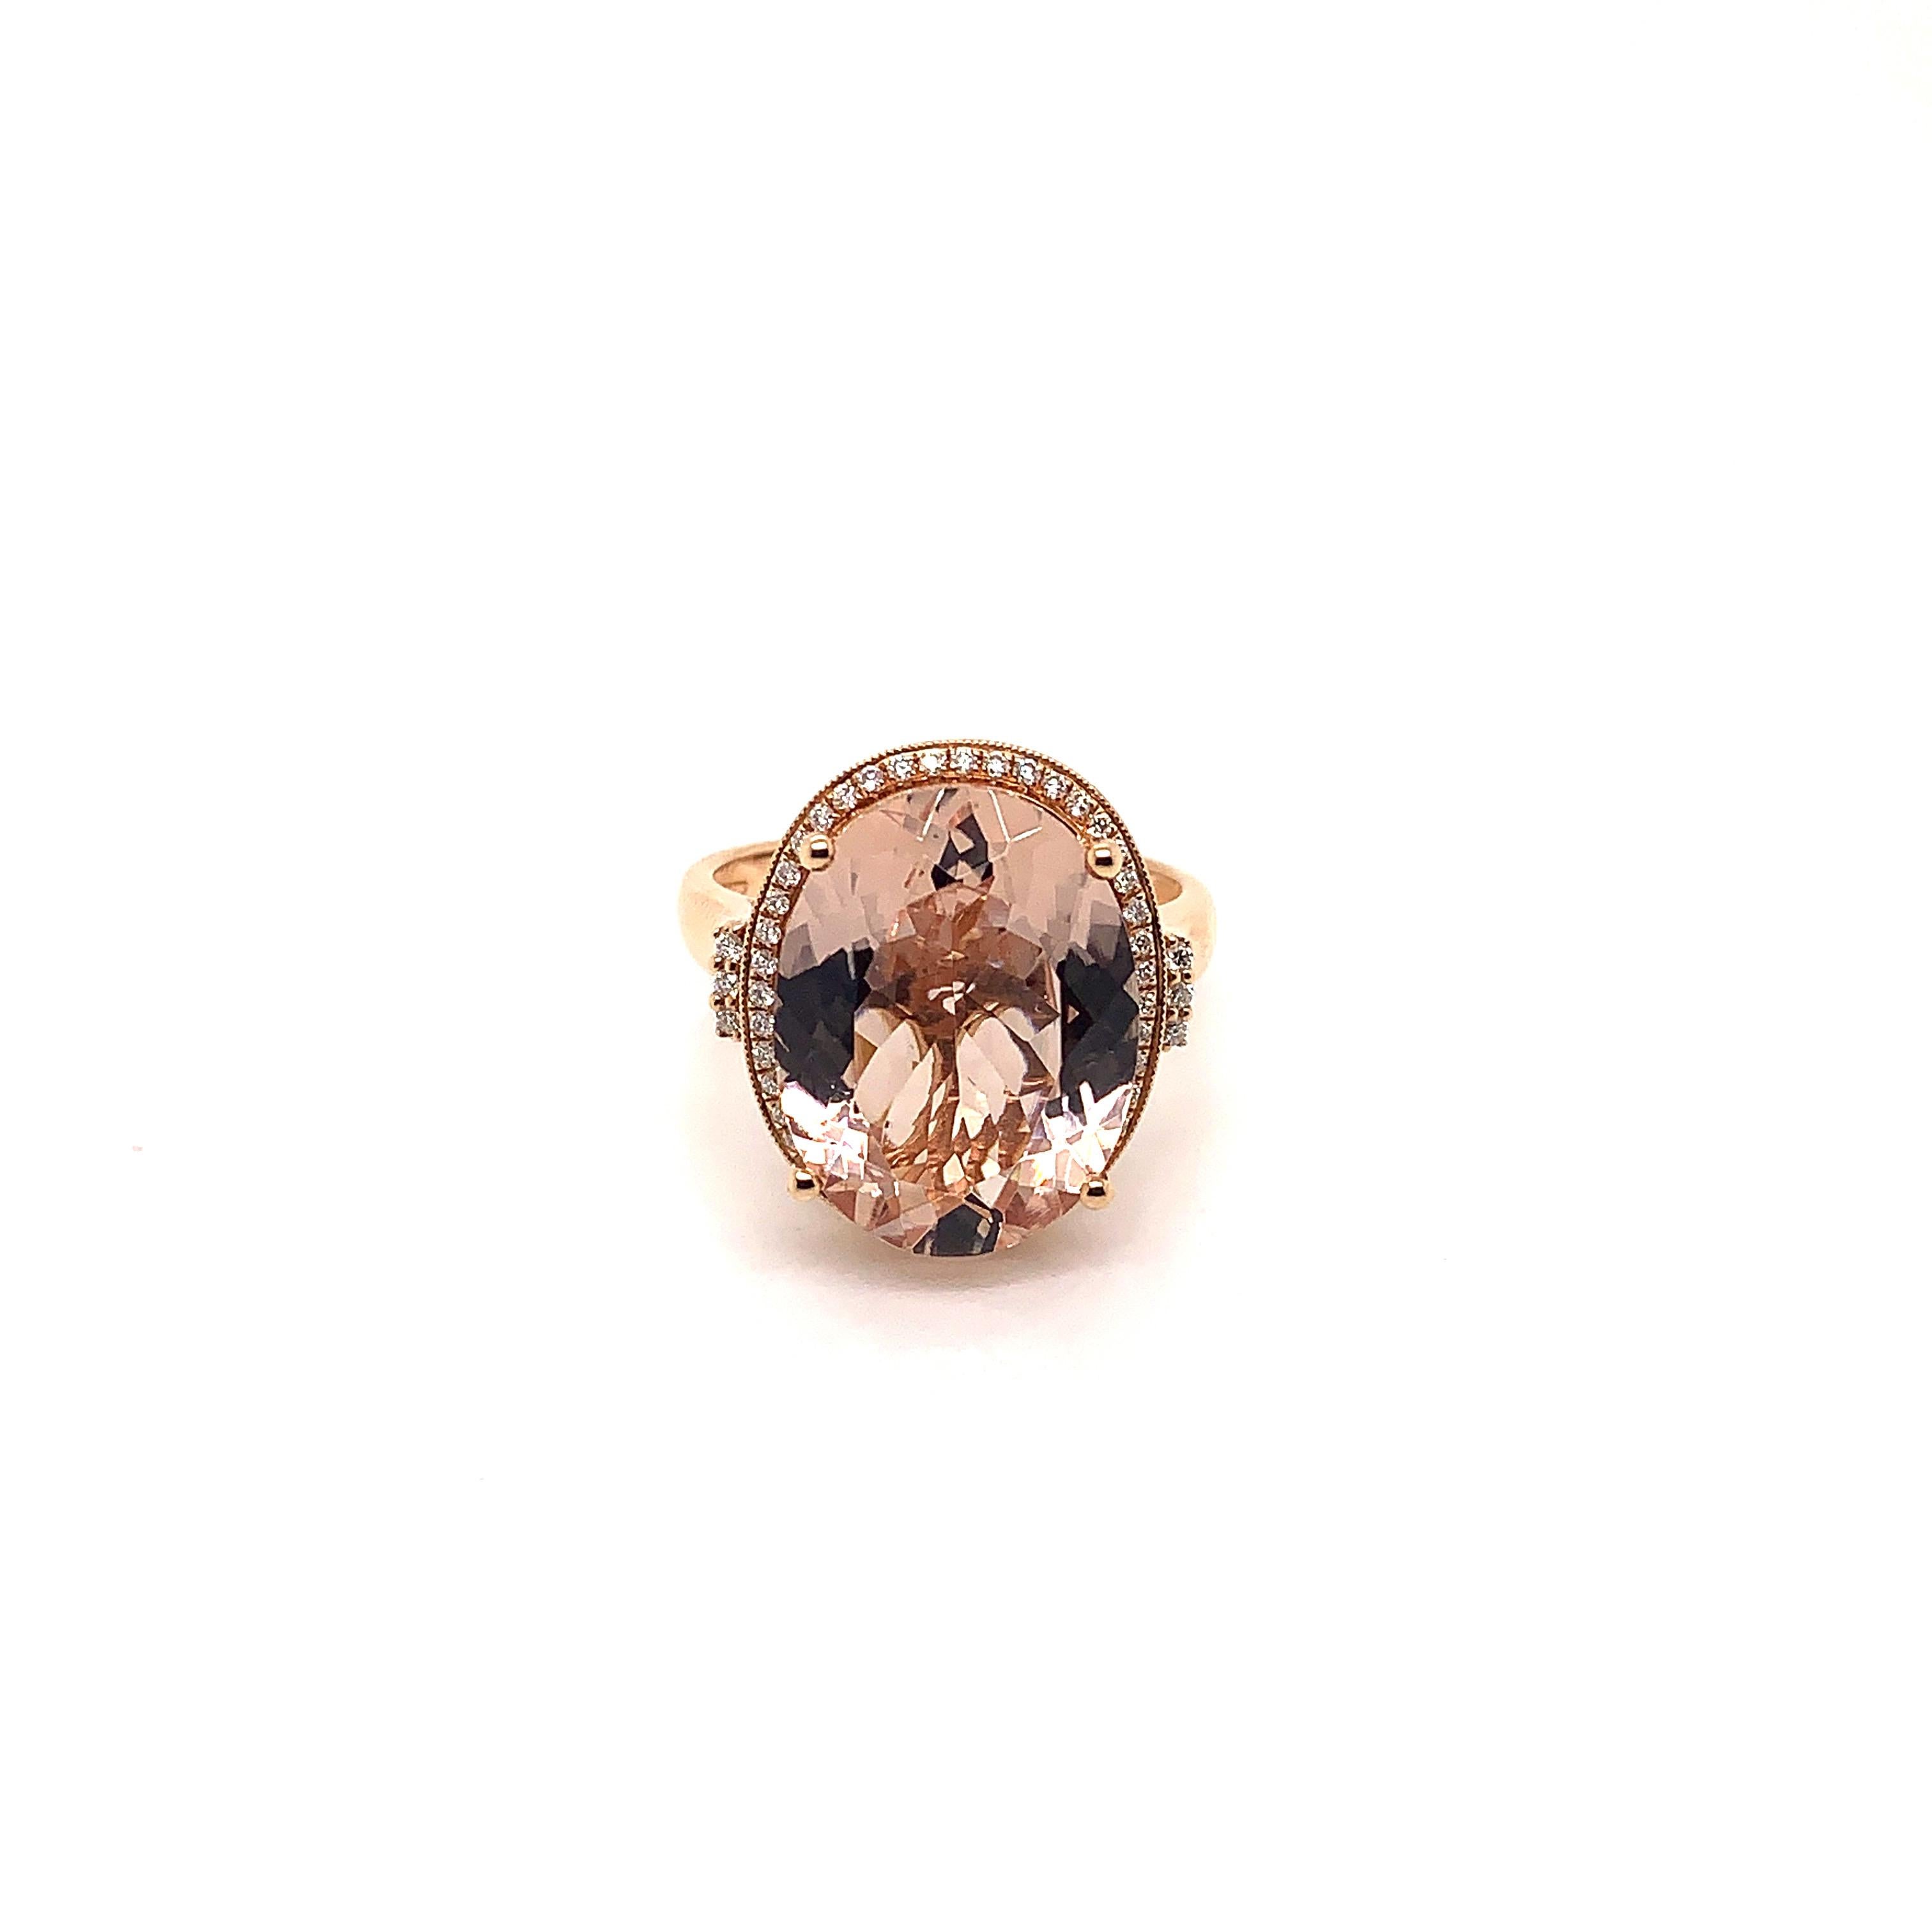 Classic morganite ring in 18K rose gold with diamonds. 

Morganite: 7.77 carat oval shape.
Diamonds: 0.177 carat, G colour, VS clarity. 
Gold: 4.661g, 18K rose gold. 